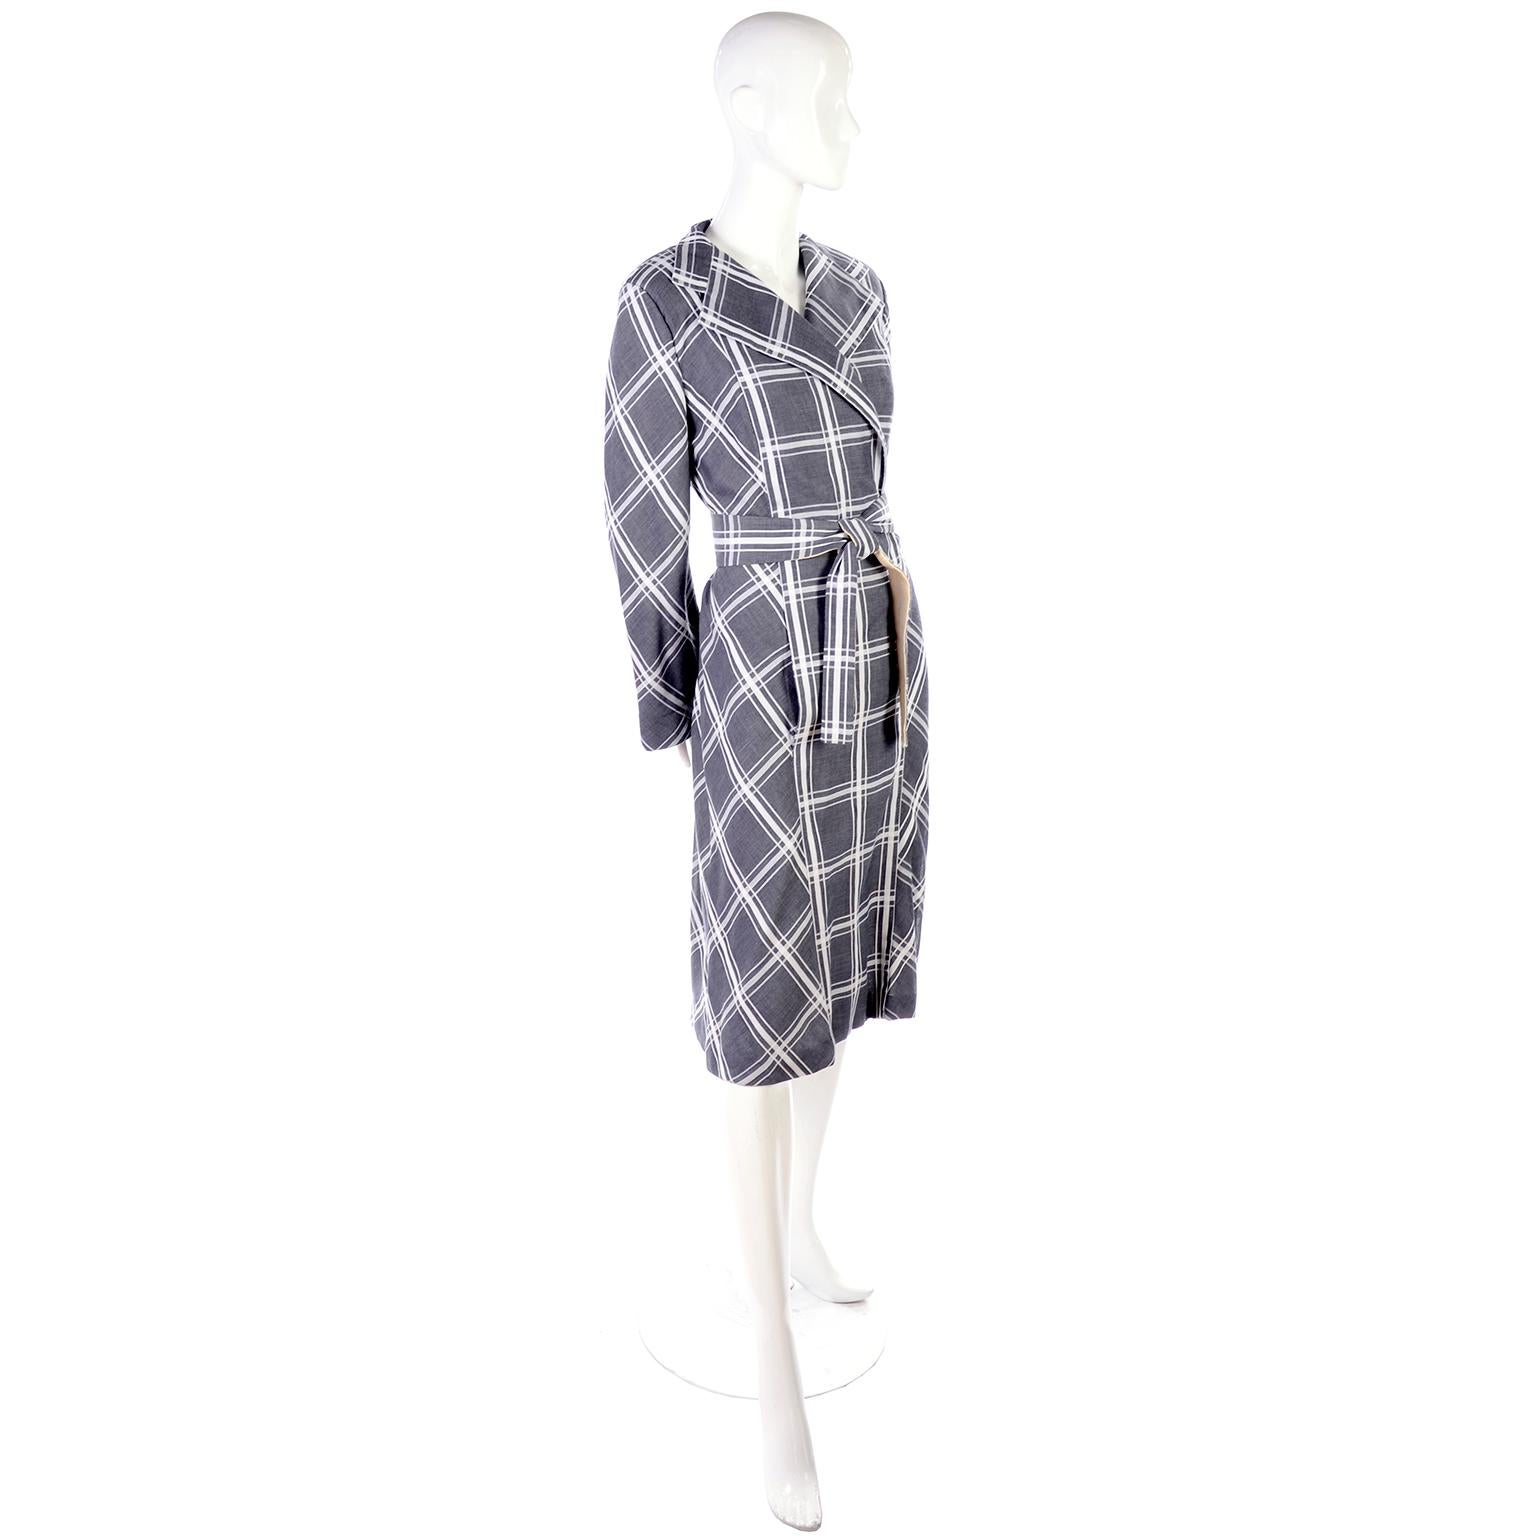 This is a lovely Pauline Trigere vintage coat dress in charcoal gray and white thick cotton plaid.  The long sleeves flair at the ends. The dress is closed at the bottom and the top secures with two hook and eyes. The tie waist belt is lined in